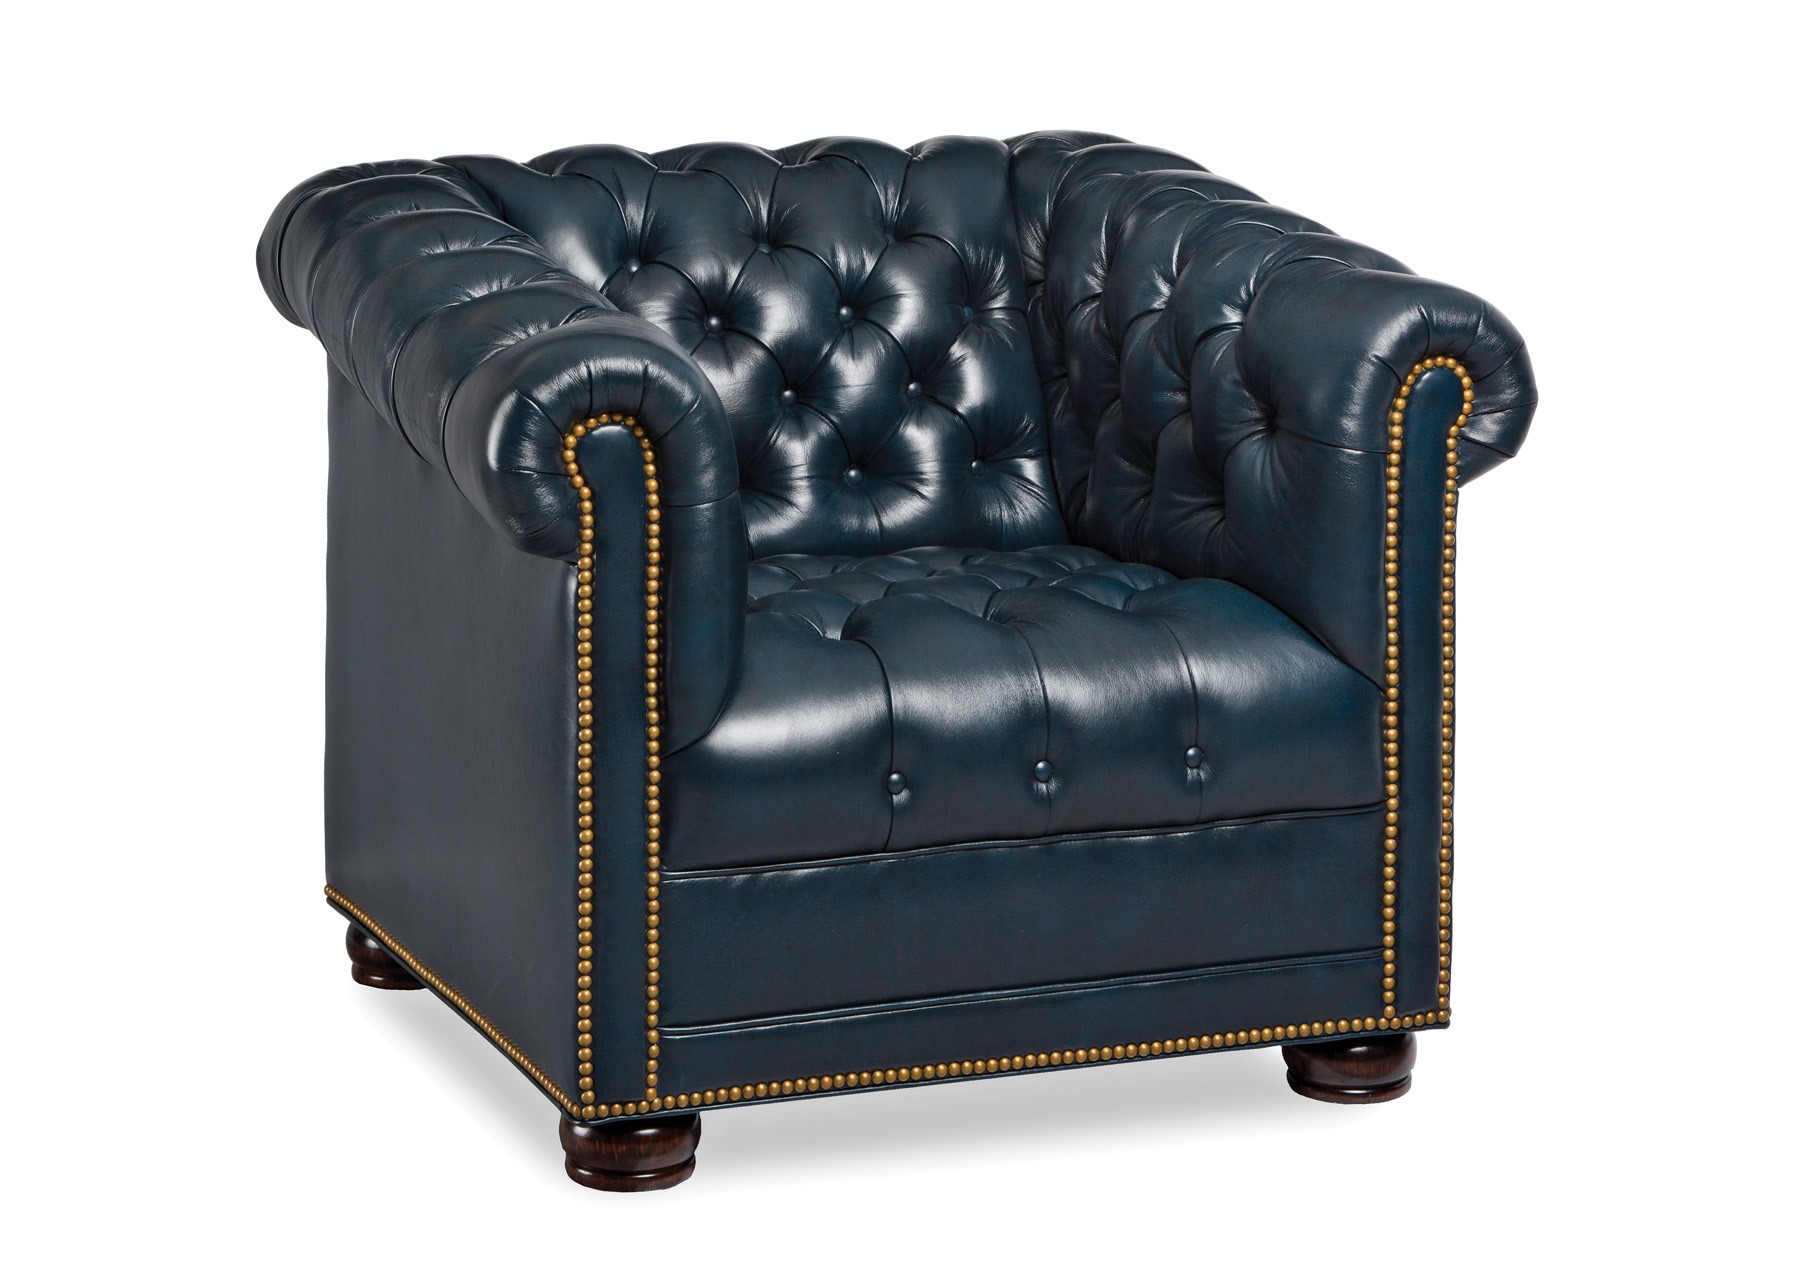 CHESTERFIELD CHAIR